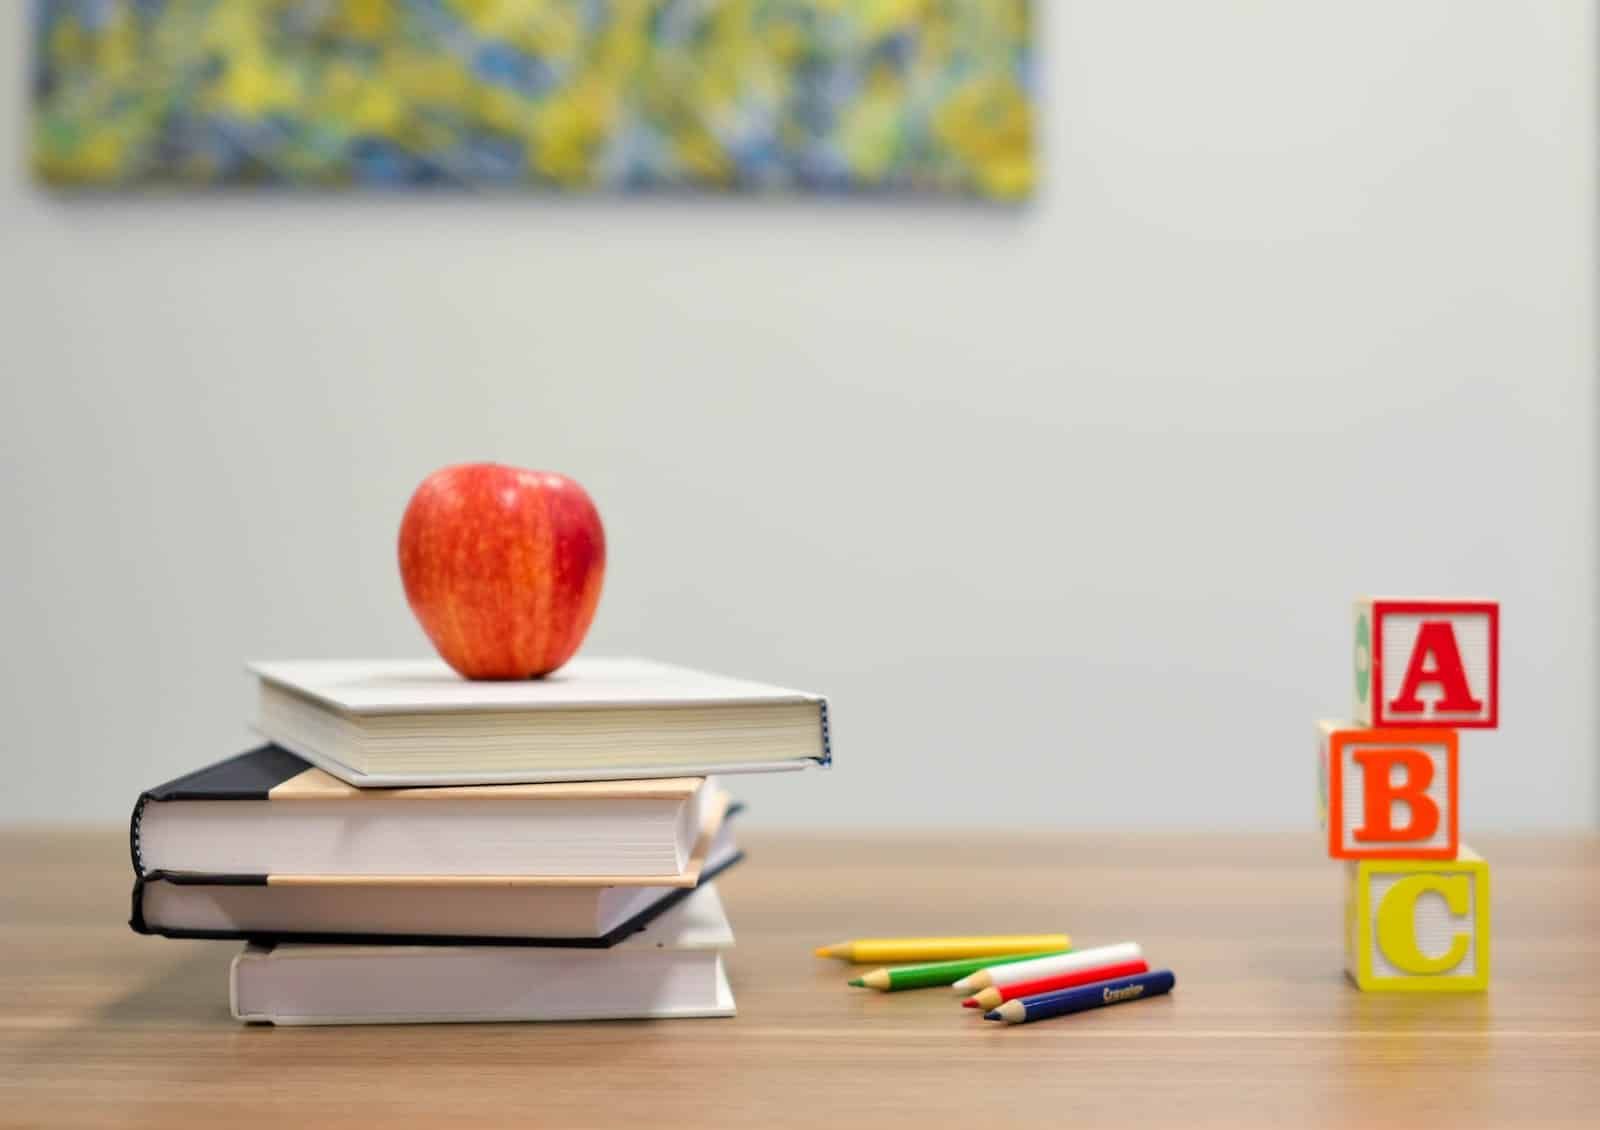 7 realistic rental tips if you’re moving for a school place